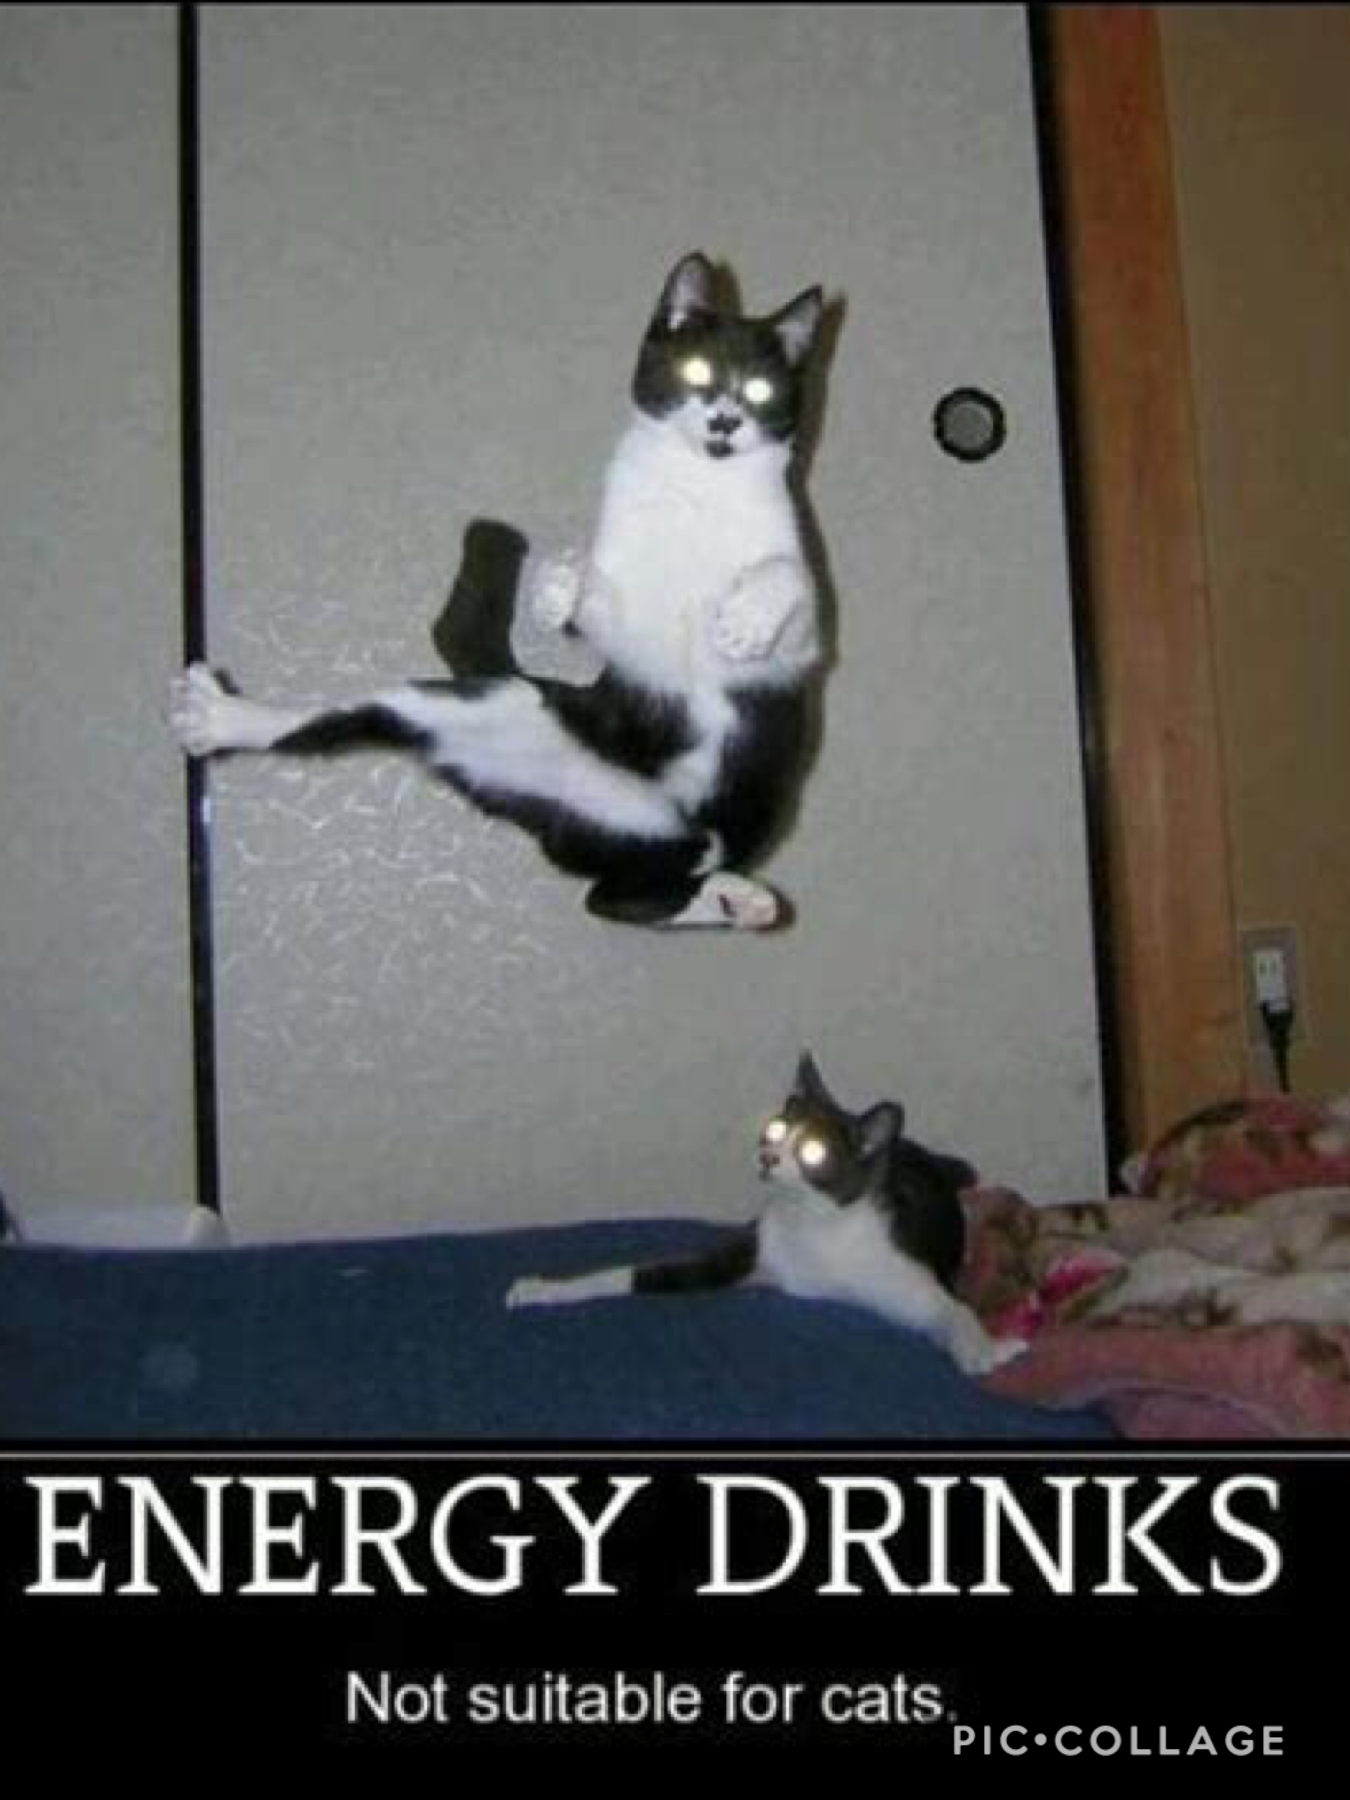 Every cat when they find  energy drinks or catnip